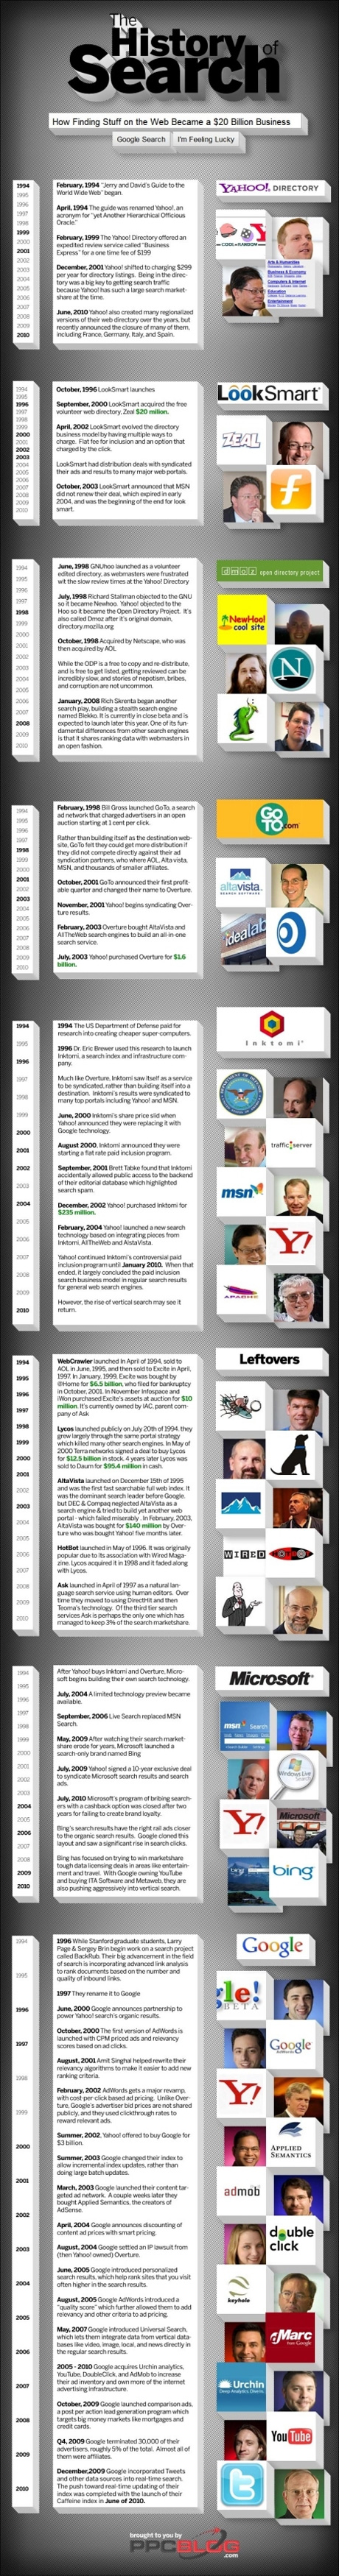 The History of Search Engines - Infographic